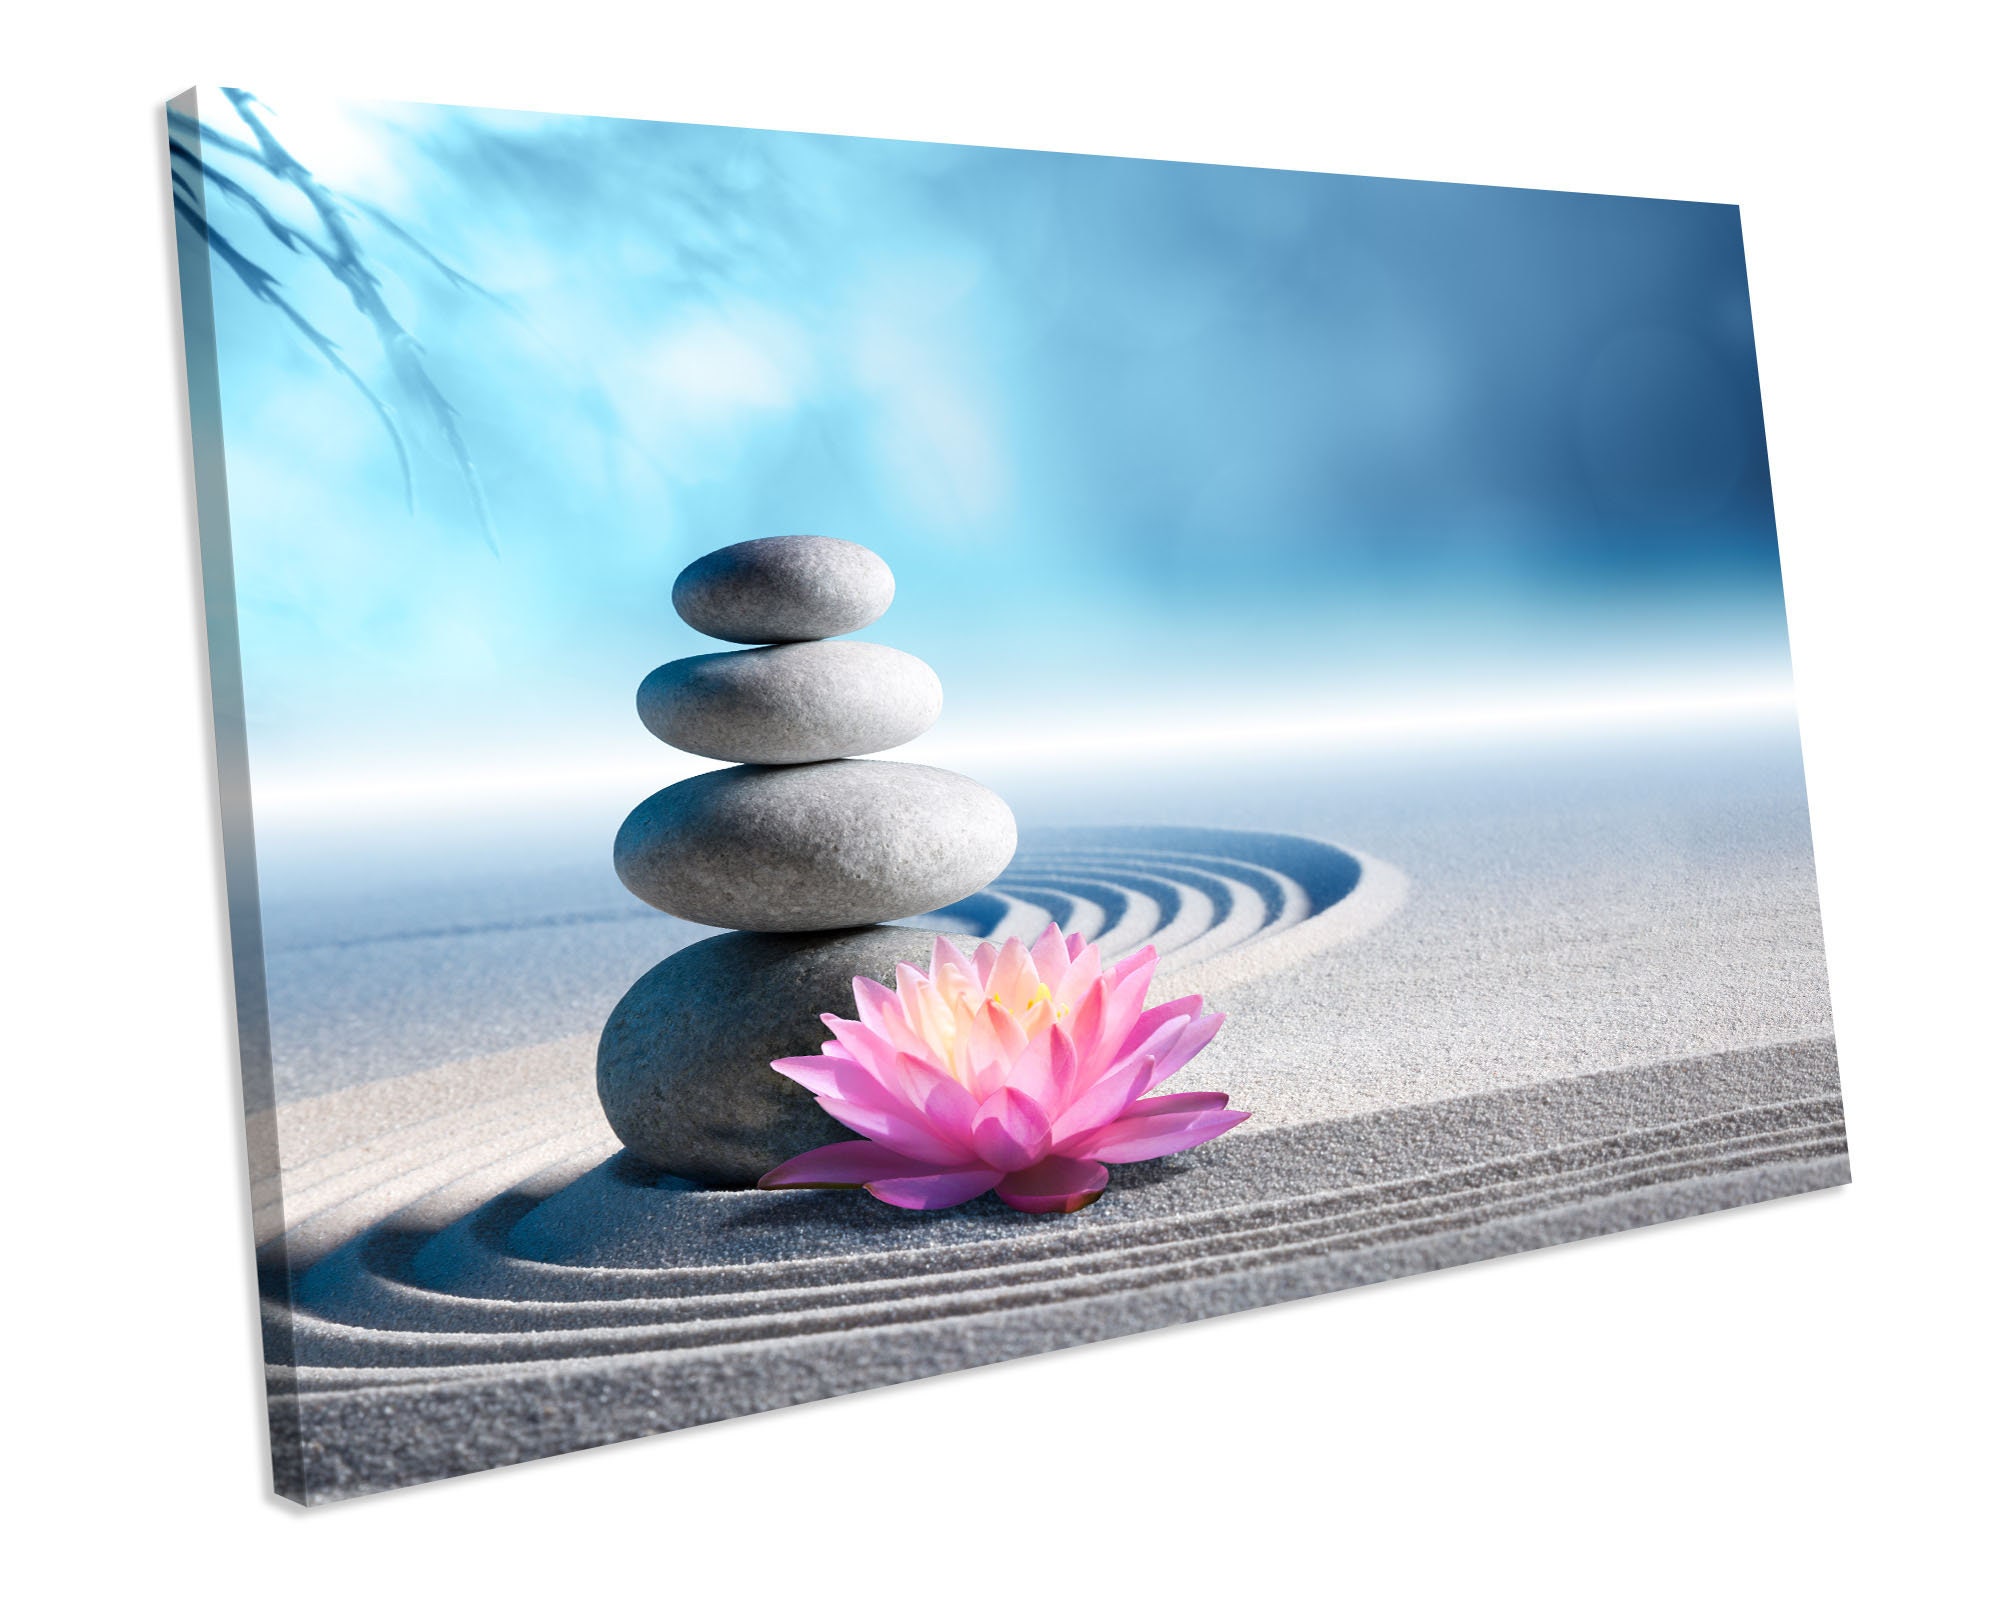 Zen Stones Floral Bathroom CANVAS WALL ART Box Framed Picture | Etsy